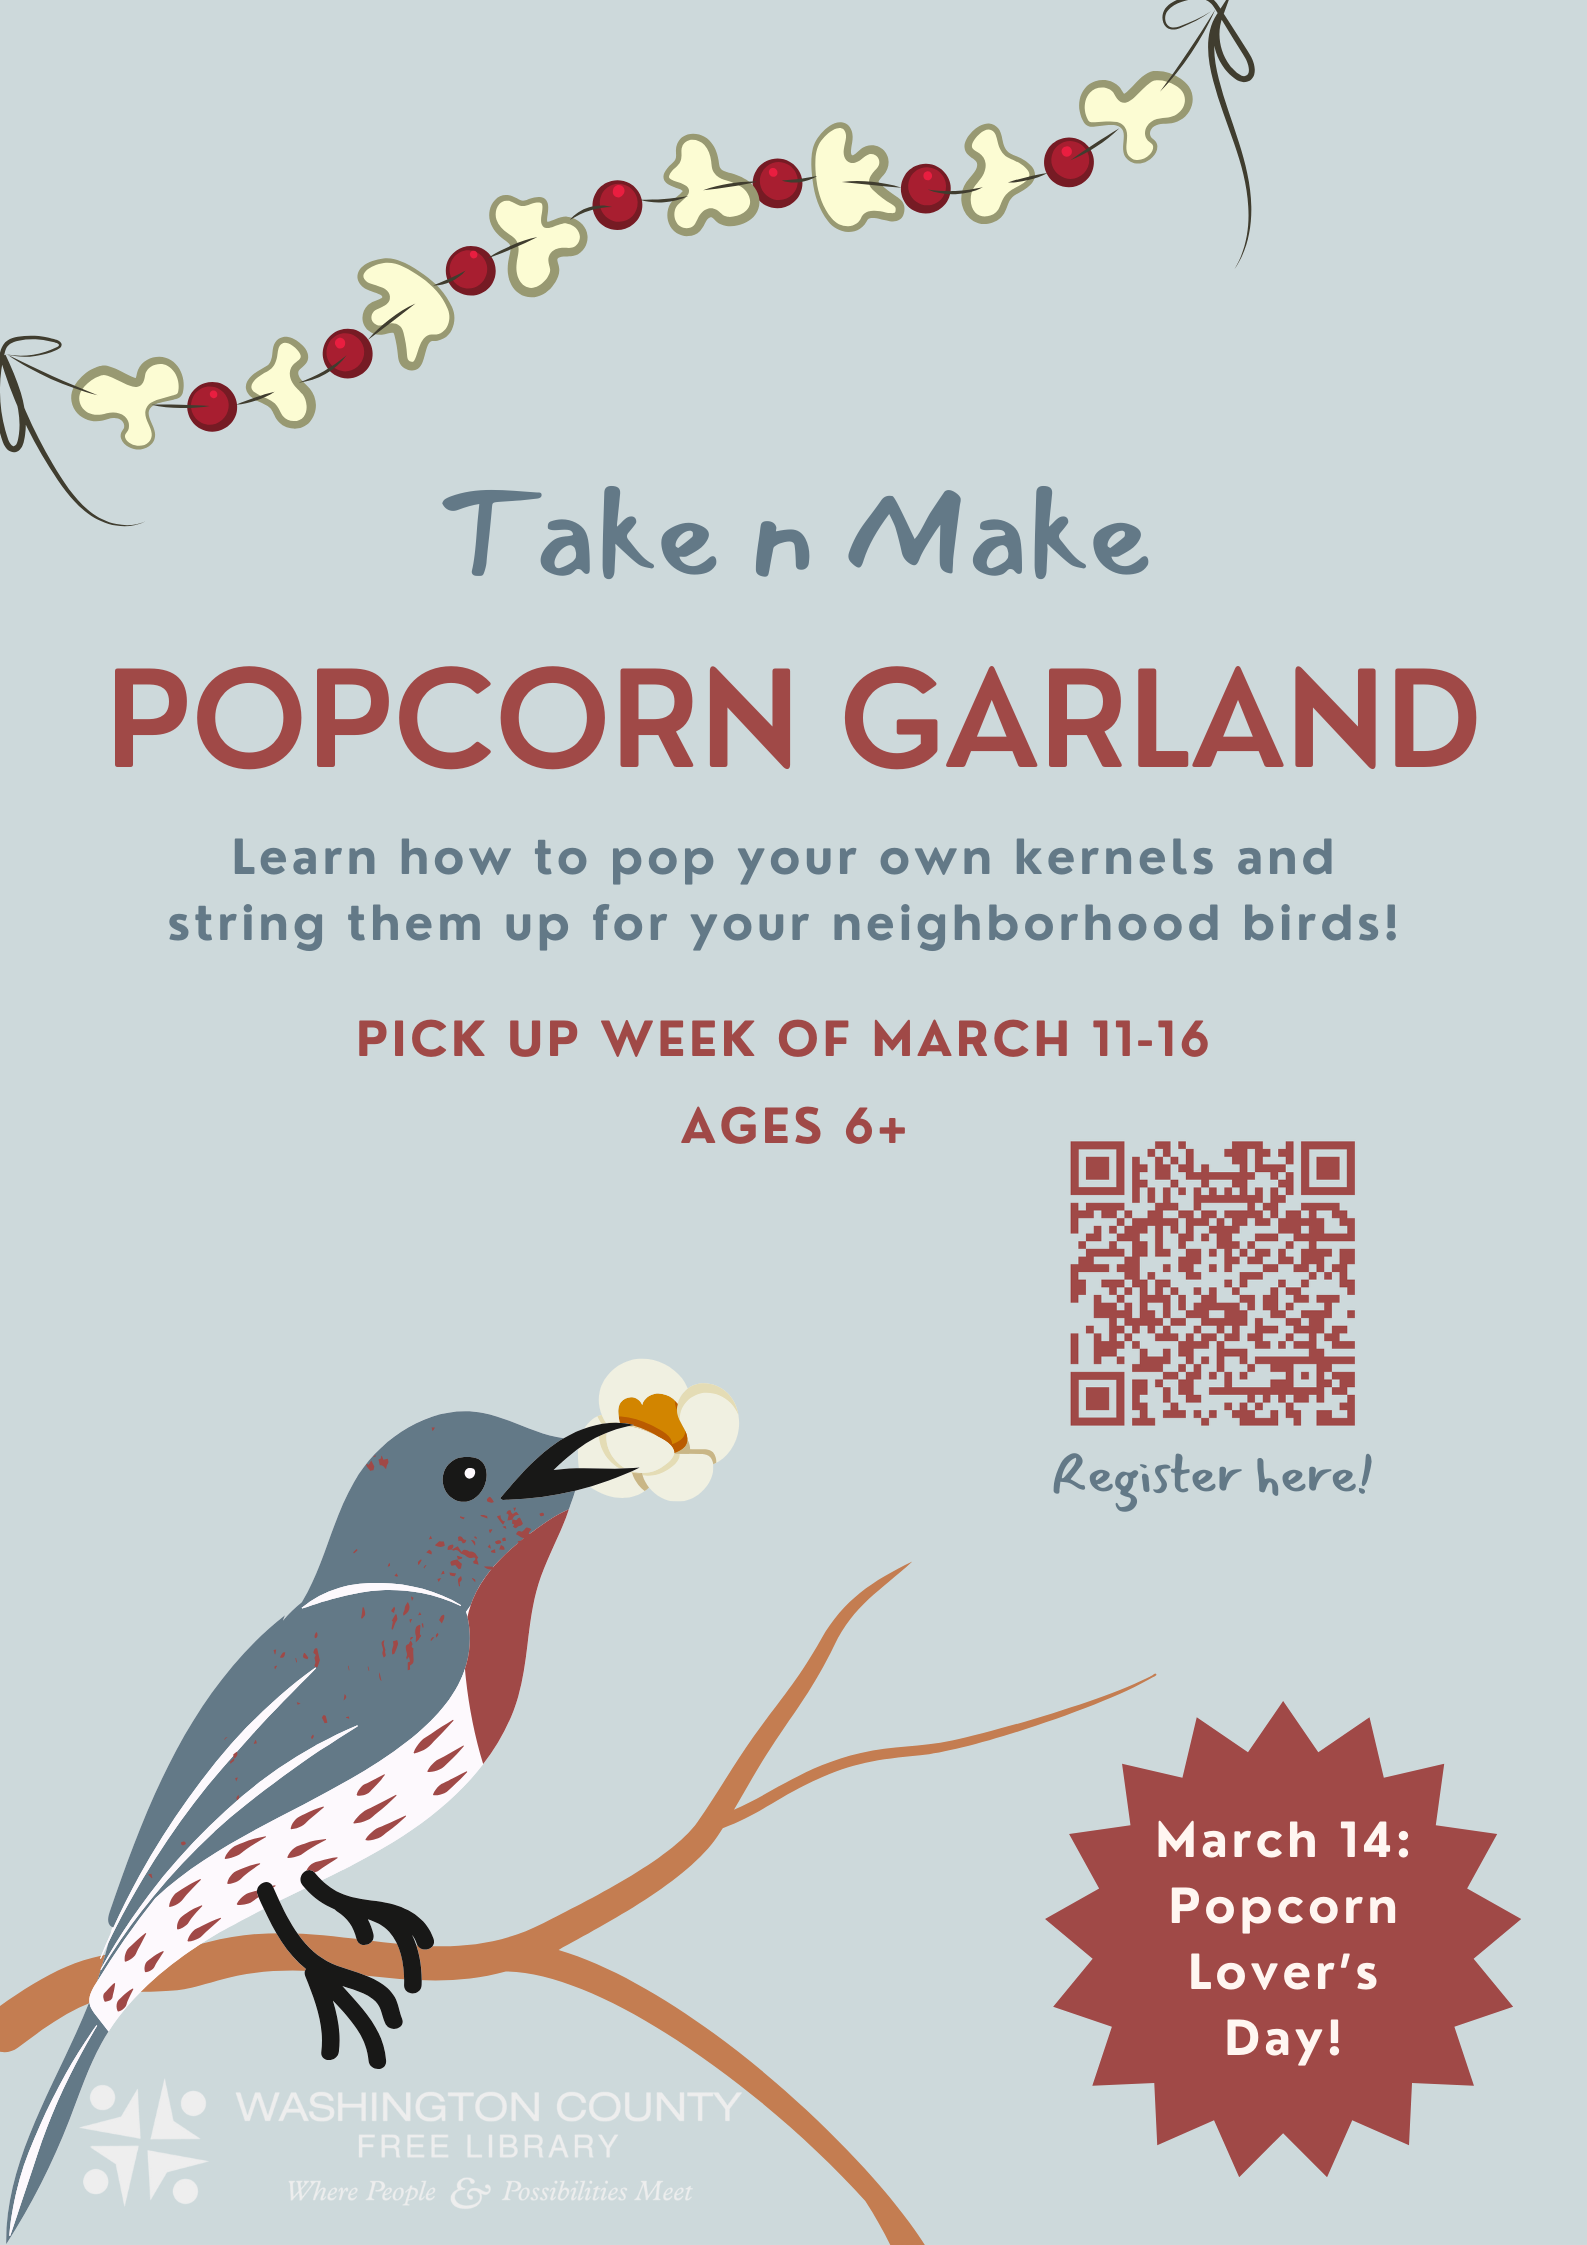 A bird of muted blue perches on a branch in the lower left corner. Grasped coyly in his beak is a fat, puffy popcorn kernel! Strung in the top left corner is a garland of popcorn and cranberries. A burgundy medallion in lower right boasts "March 14: Popcorn Lover's Day". The flyer reads: "Take N Make: Popcorn Garland. Learn how to pop your own kernels and string them up for your neighborhood birds! Pick up week of March 11 to 16. Ages 6+. Register here" with a QR code to scan and register. 